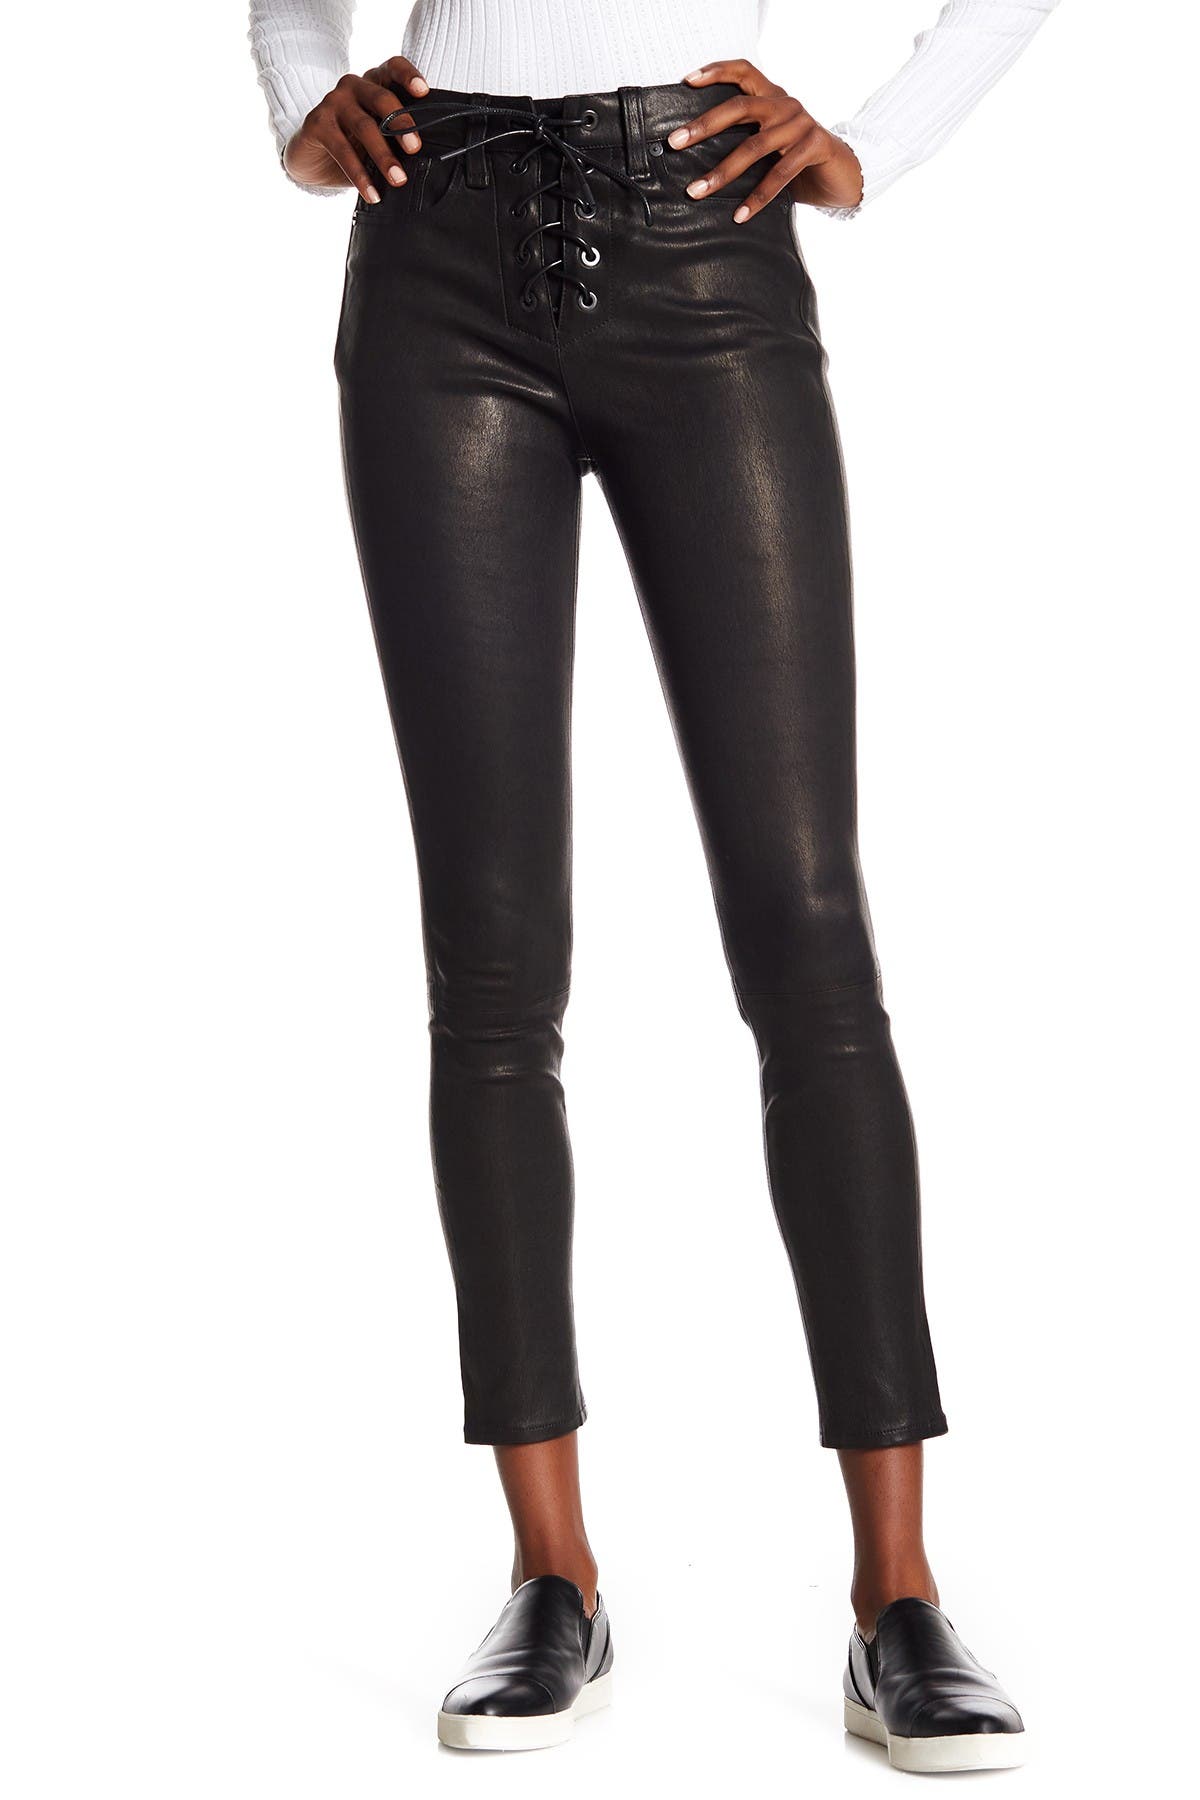 rag and bone lace up jeans